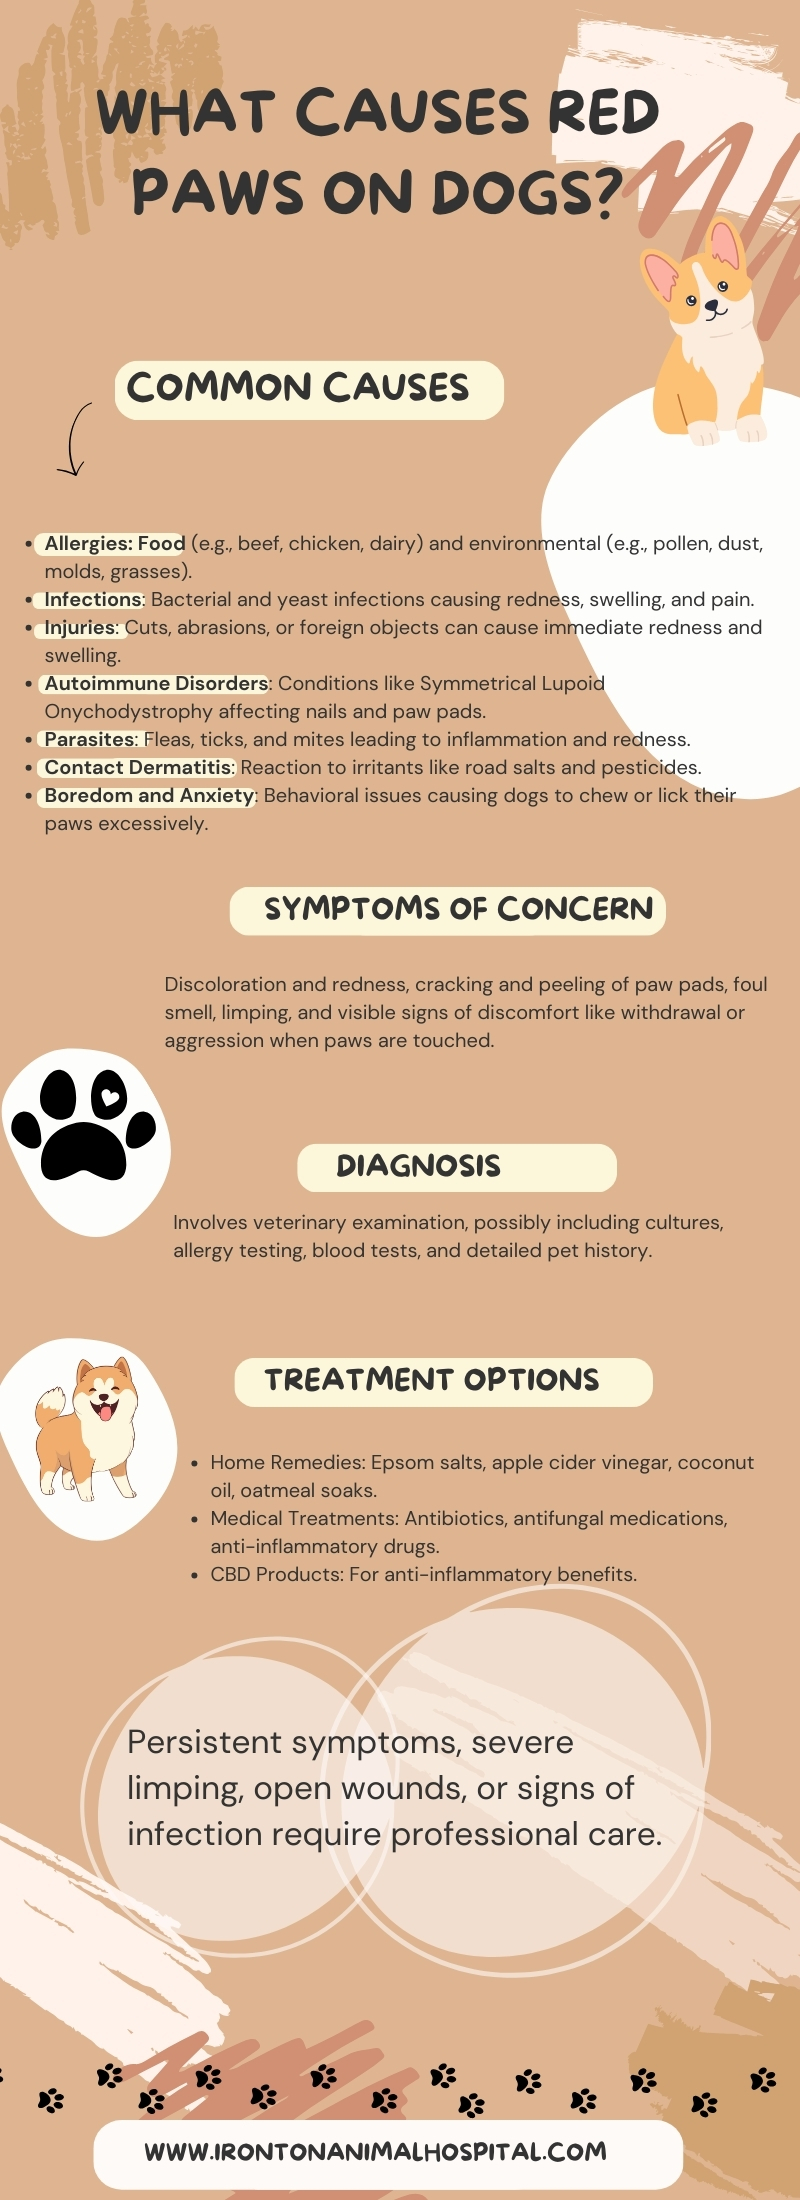 Red Paws on Dogs infographic